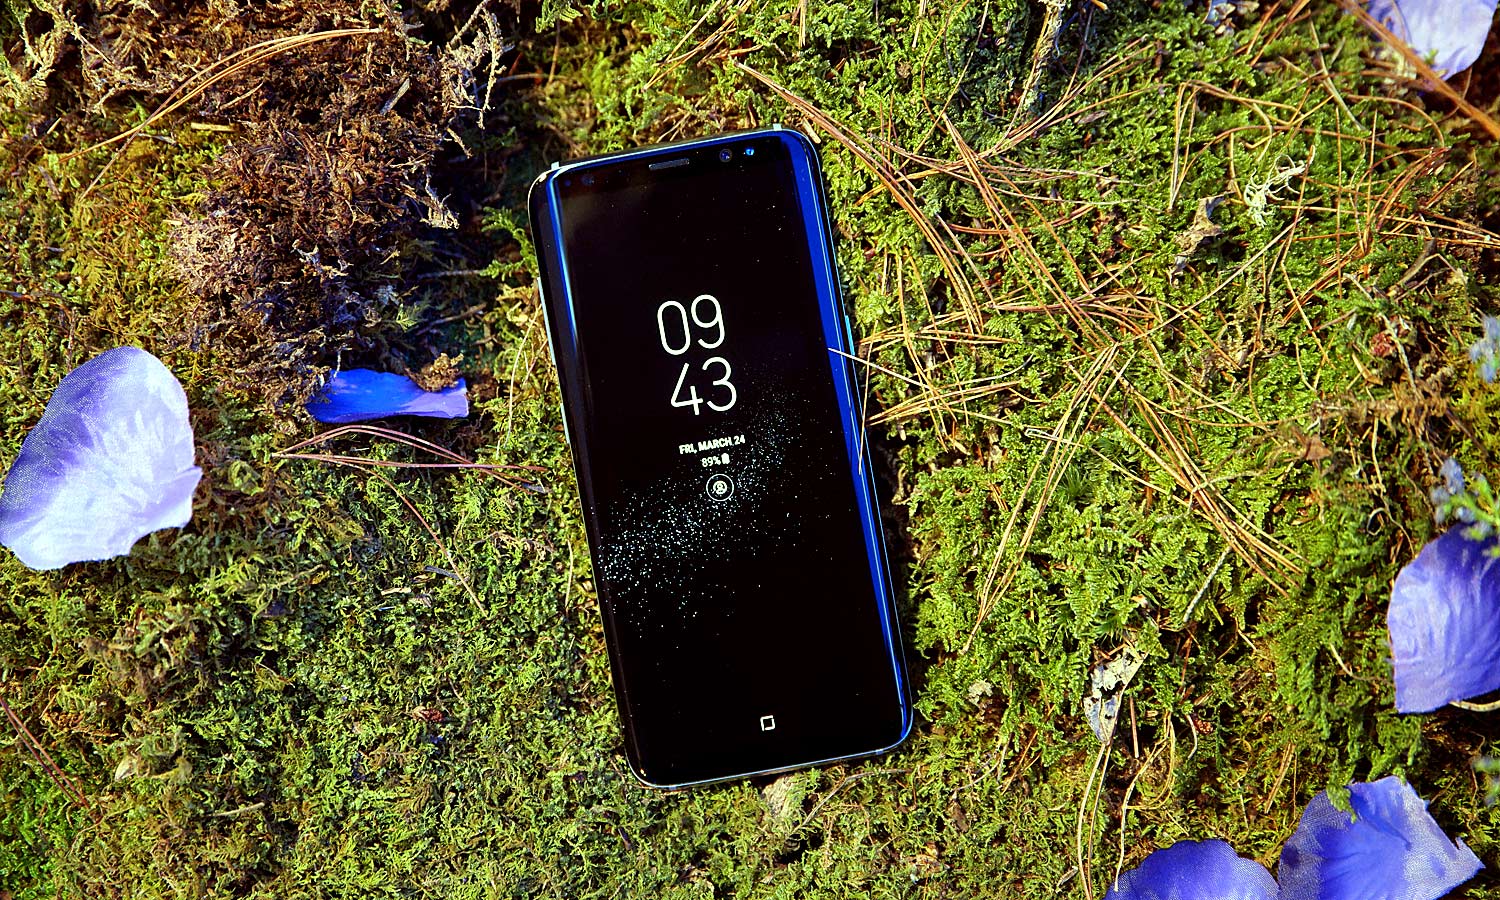 Get to Know the Galaxy S8